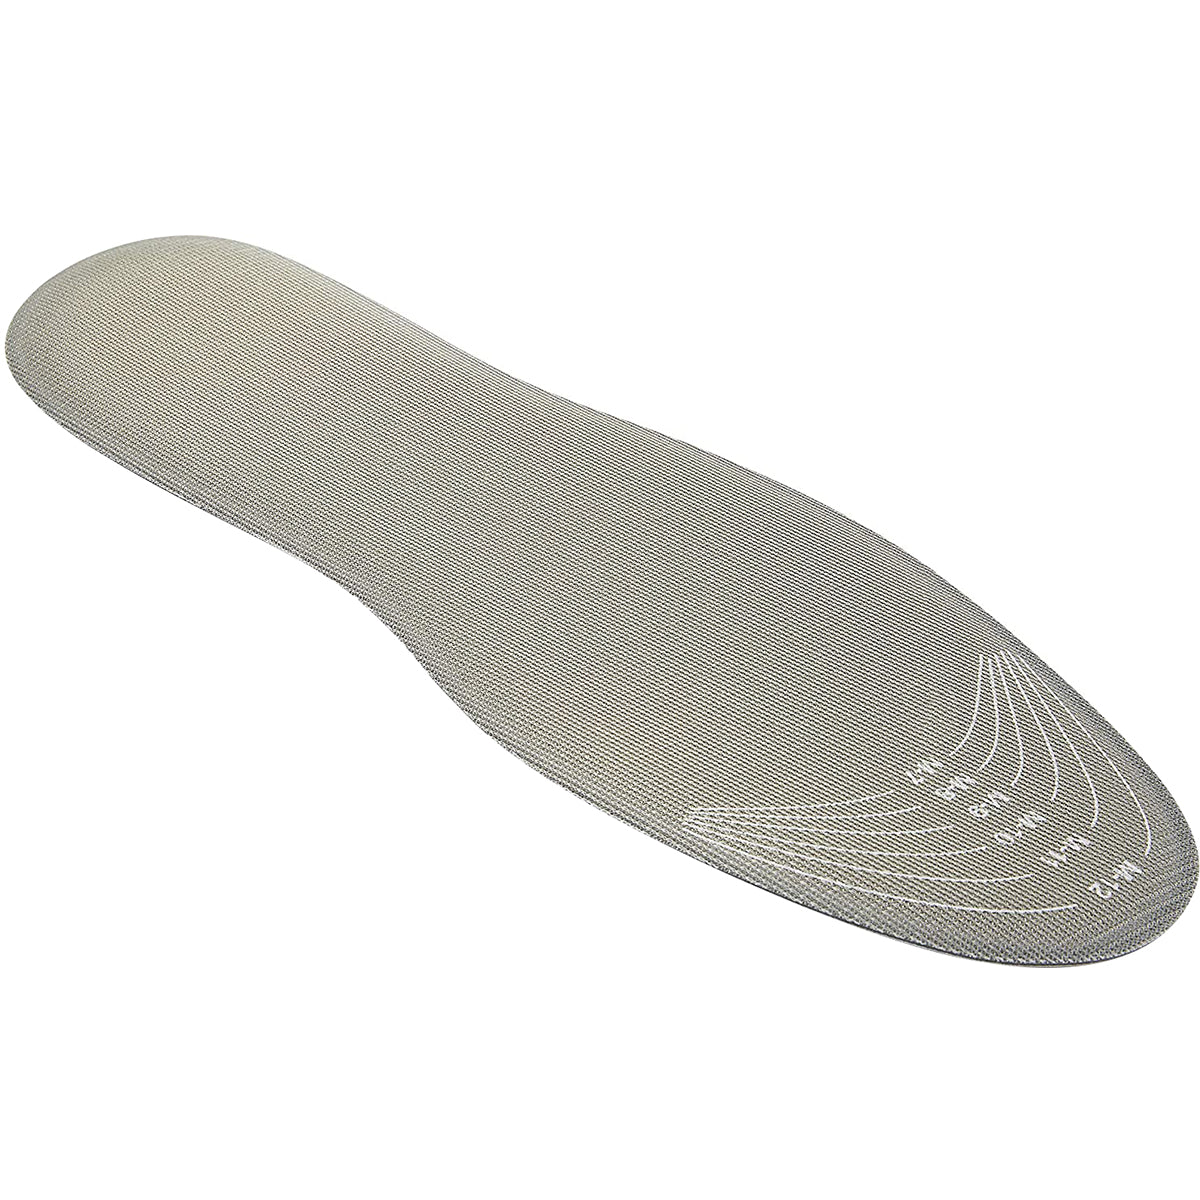 Sof Sole Memory Plus Full Length Shoe Insoles SofSole